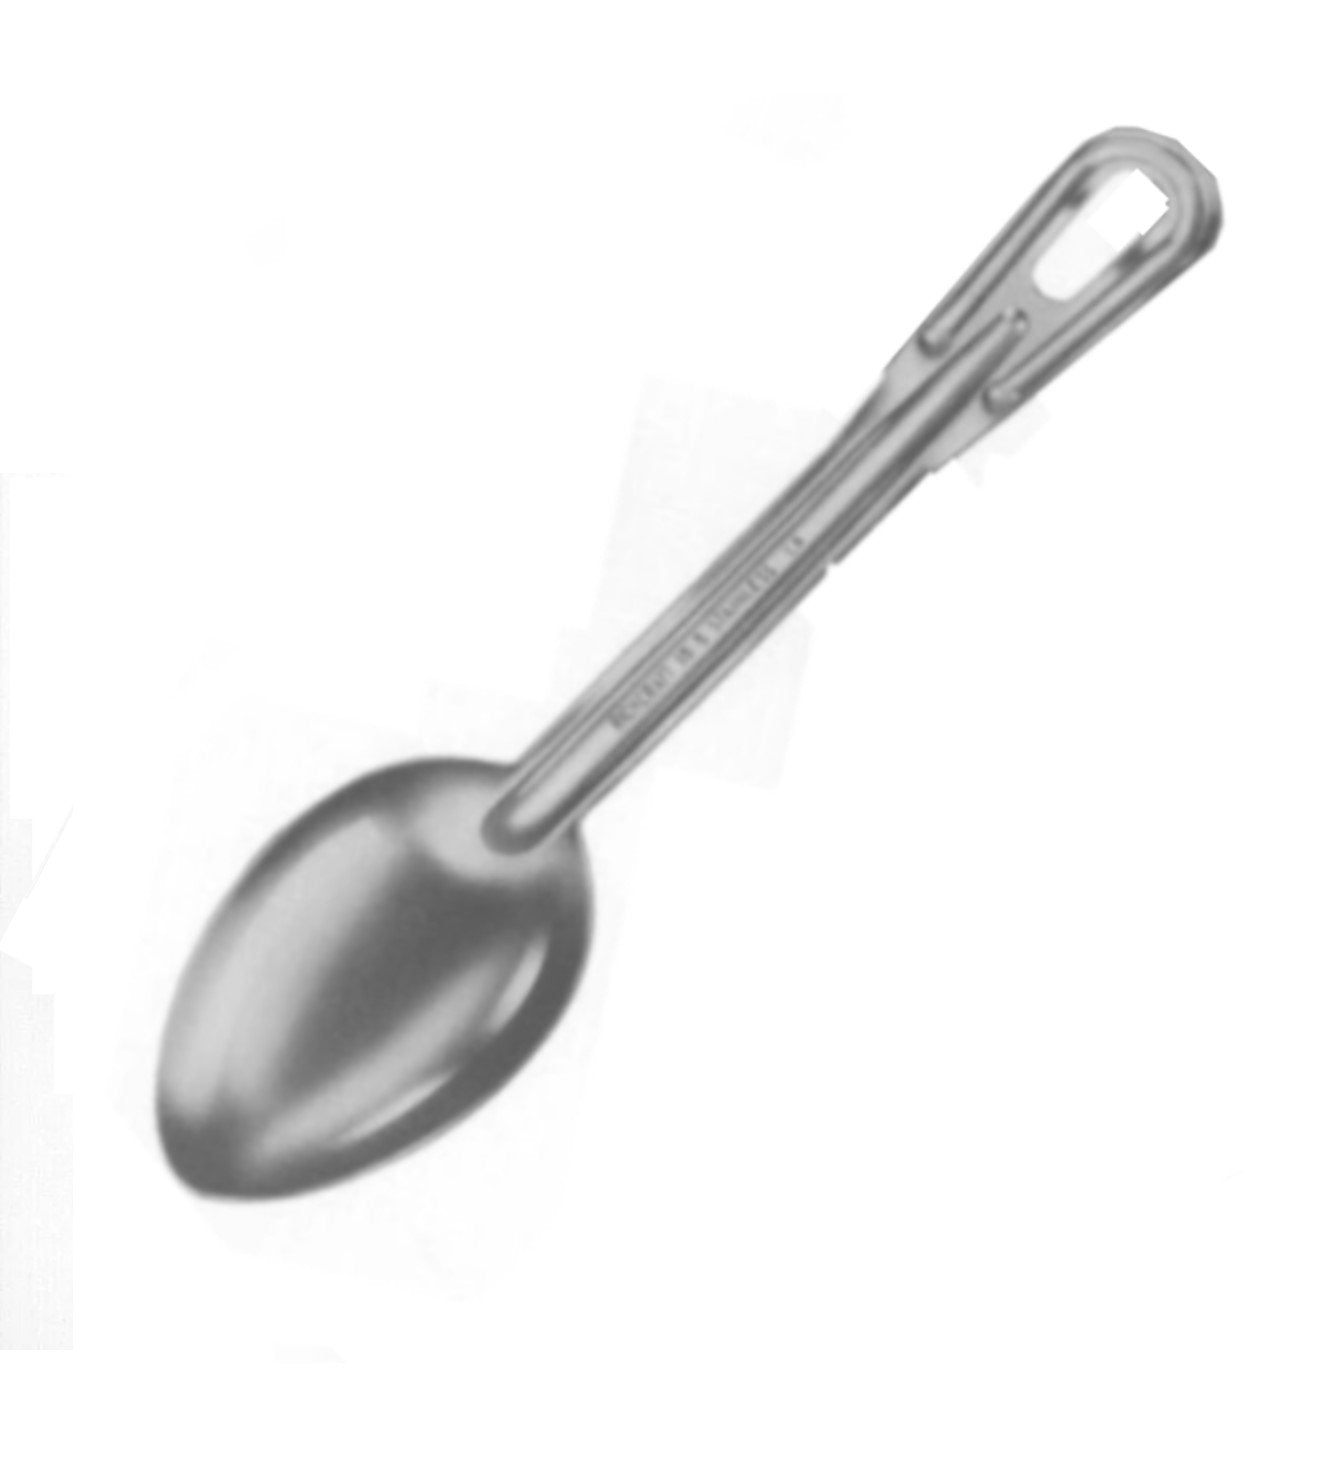 RICH-CRAFT 6011, 11" Solid Serving Spoon - Stainless Steel